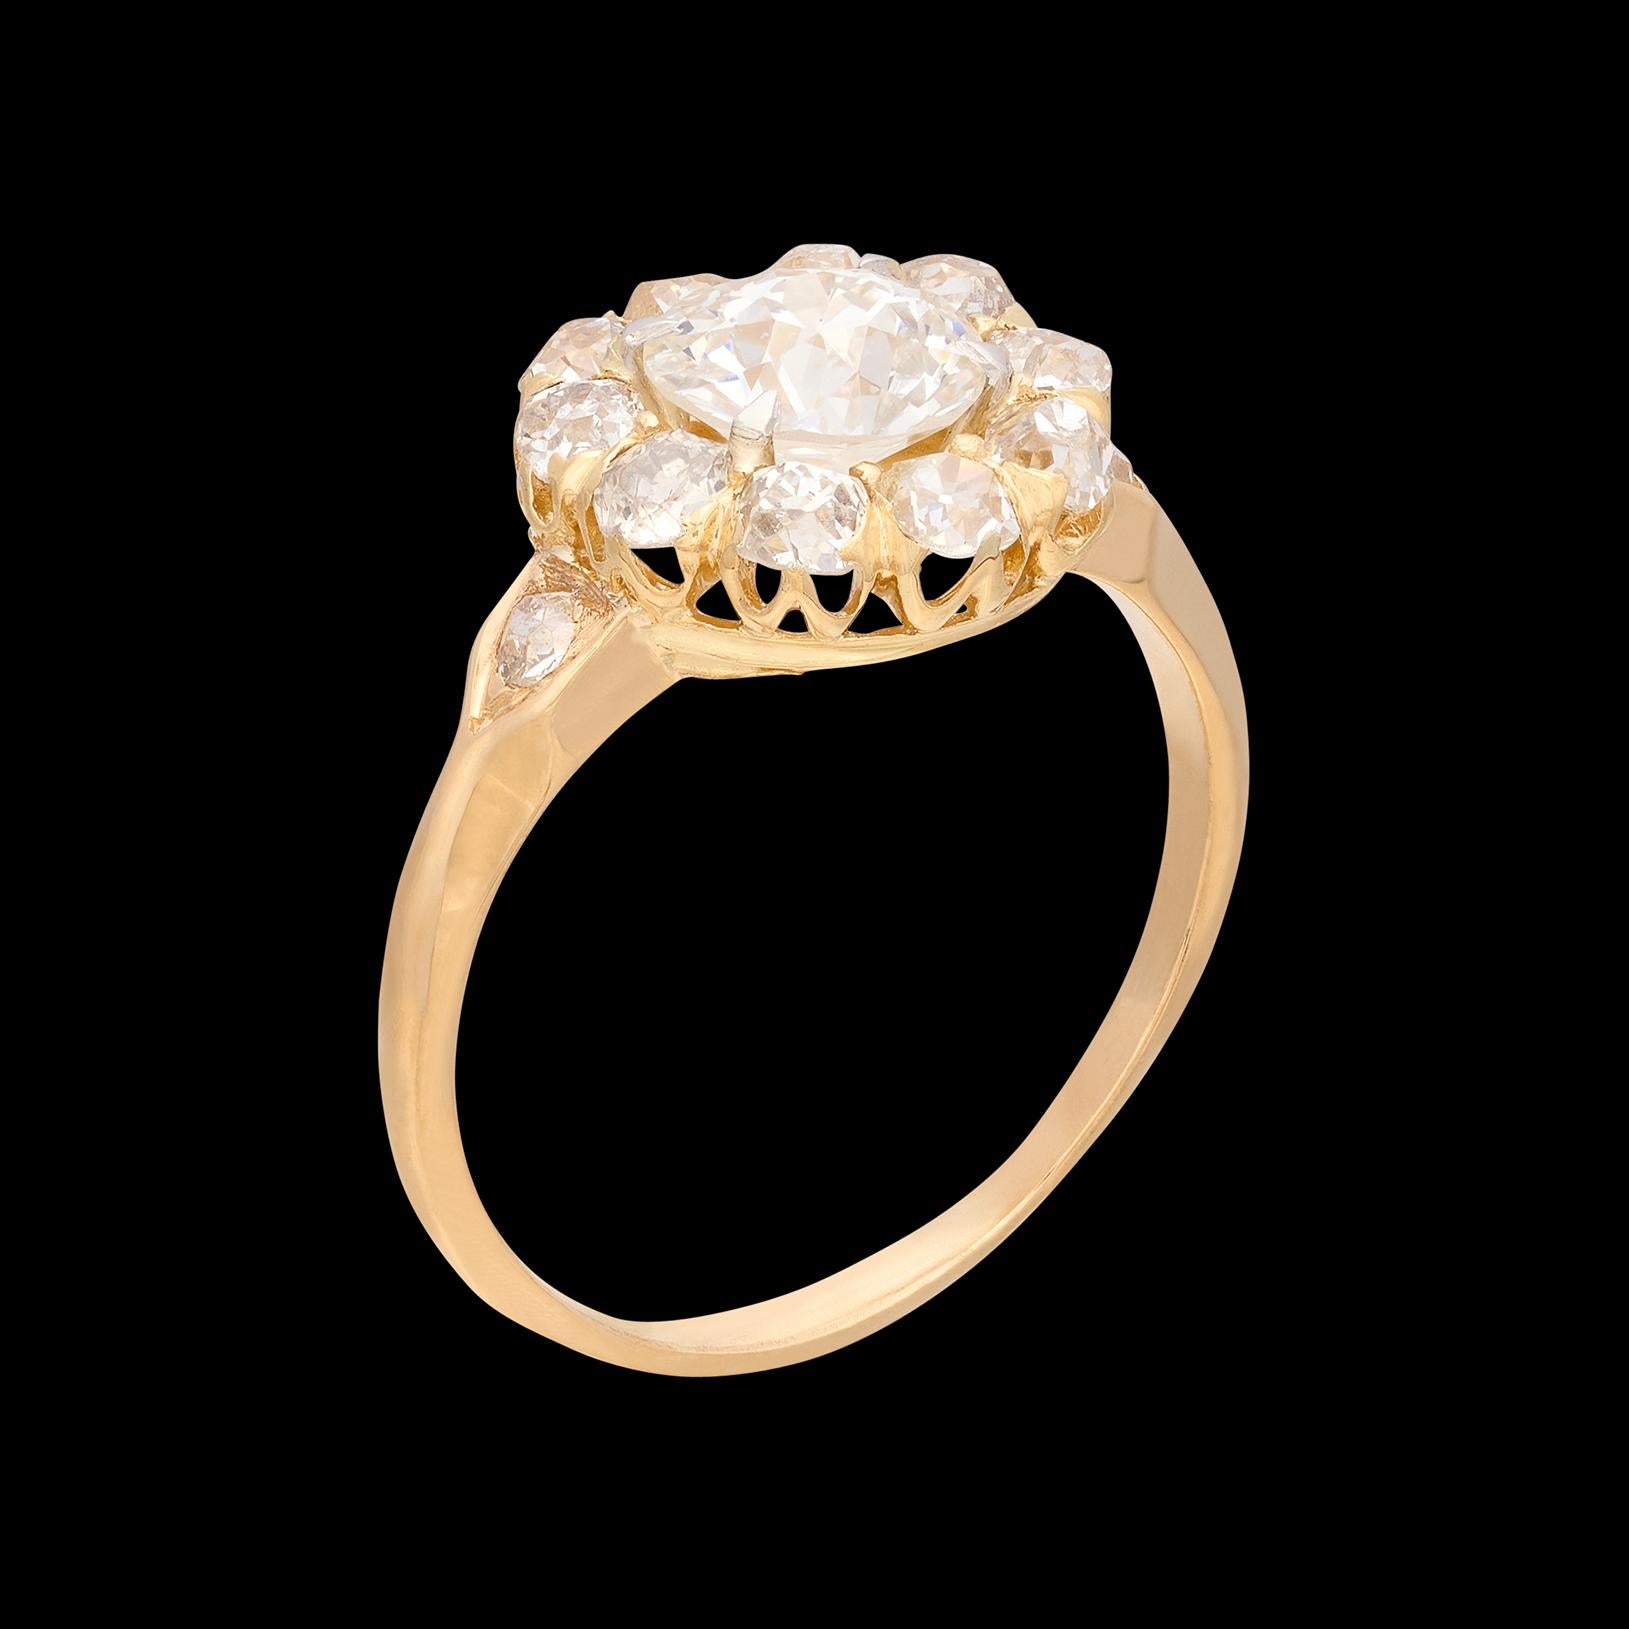 For Sale:  GIA 1.01-ct. Diamond & 18k Gold Antique Ring 7